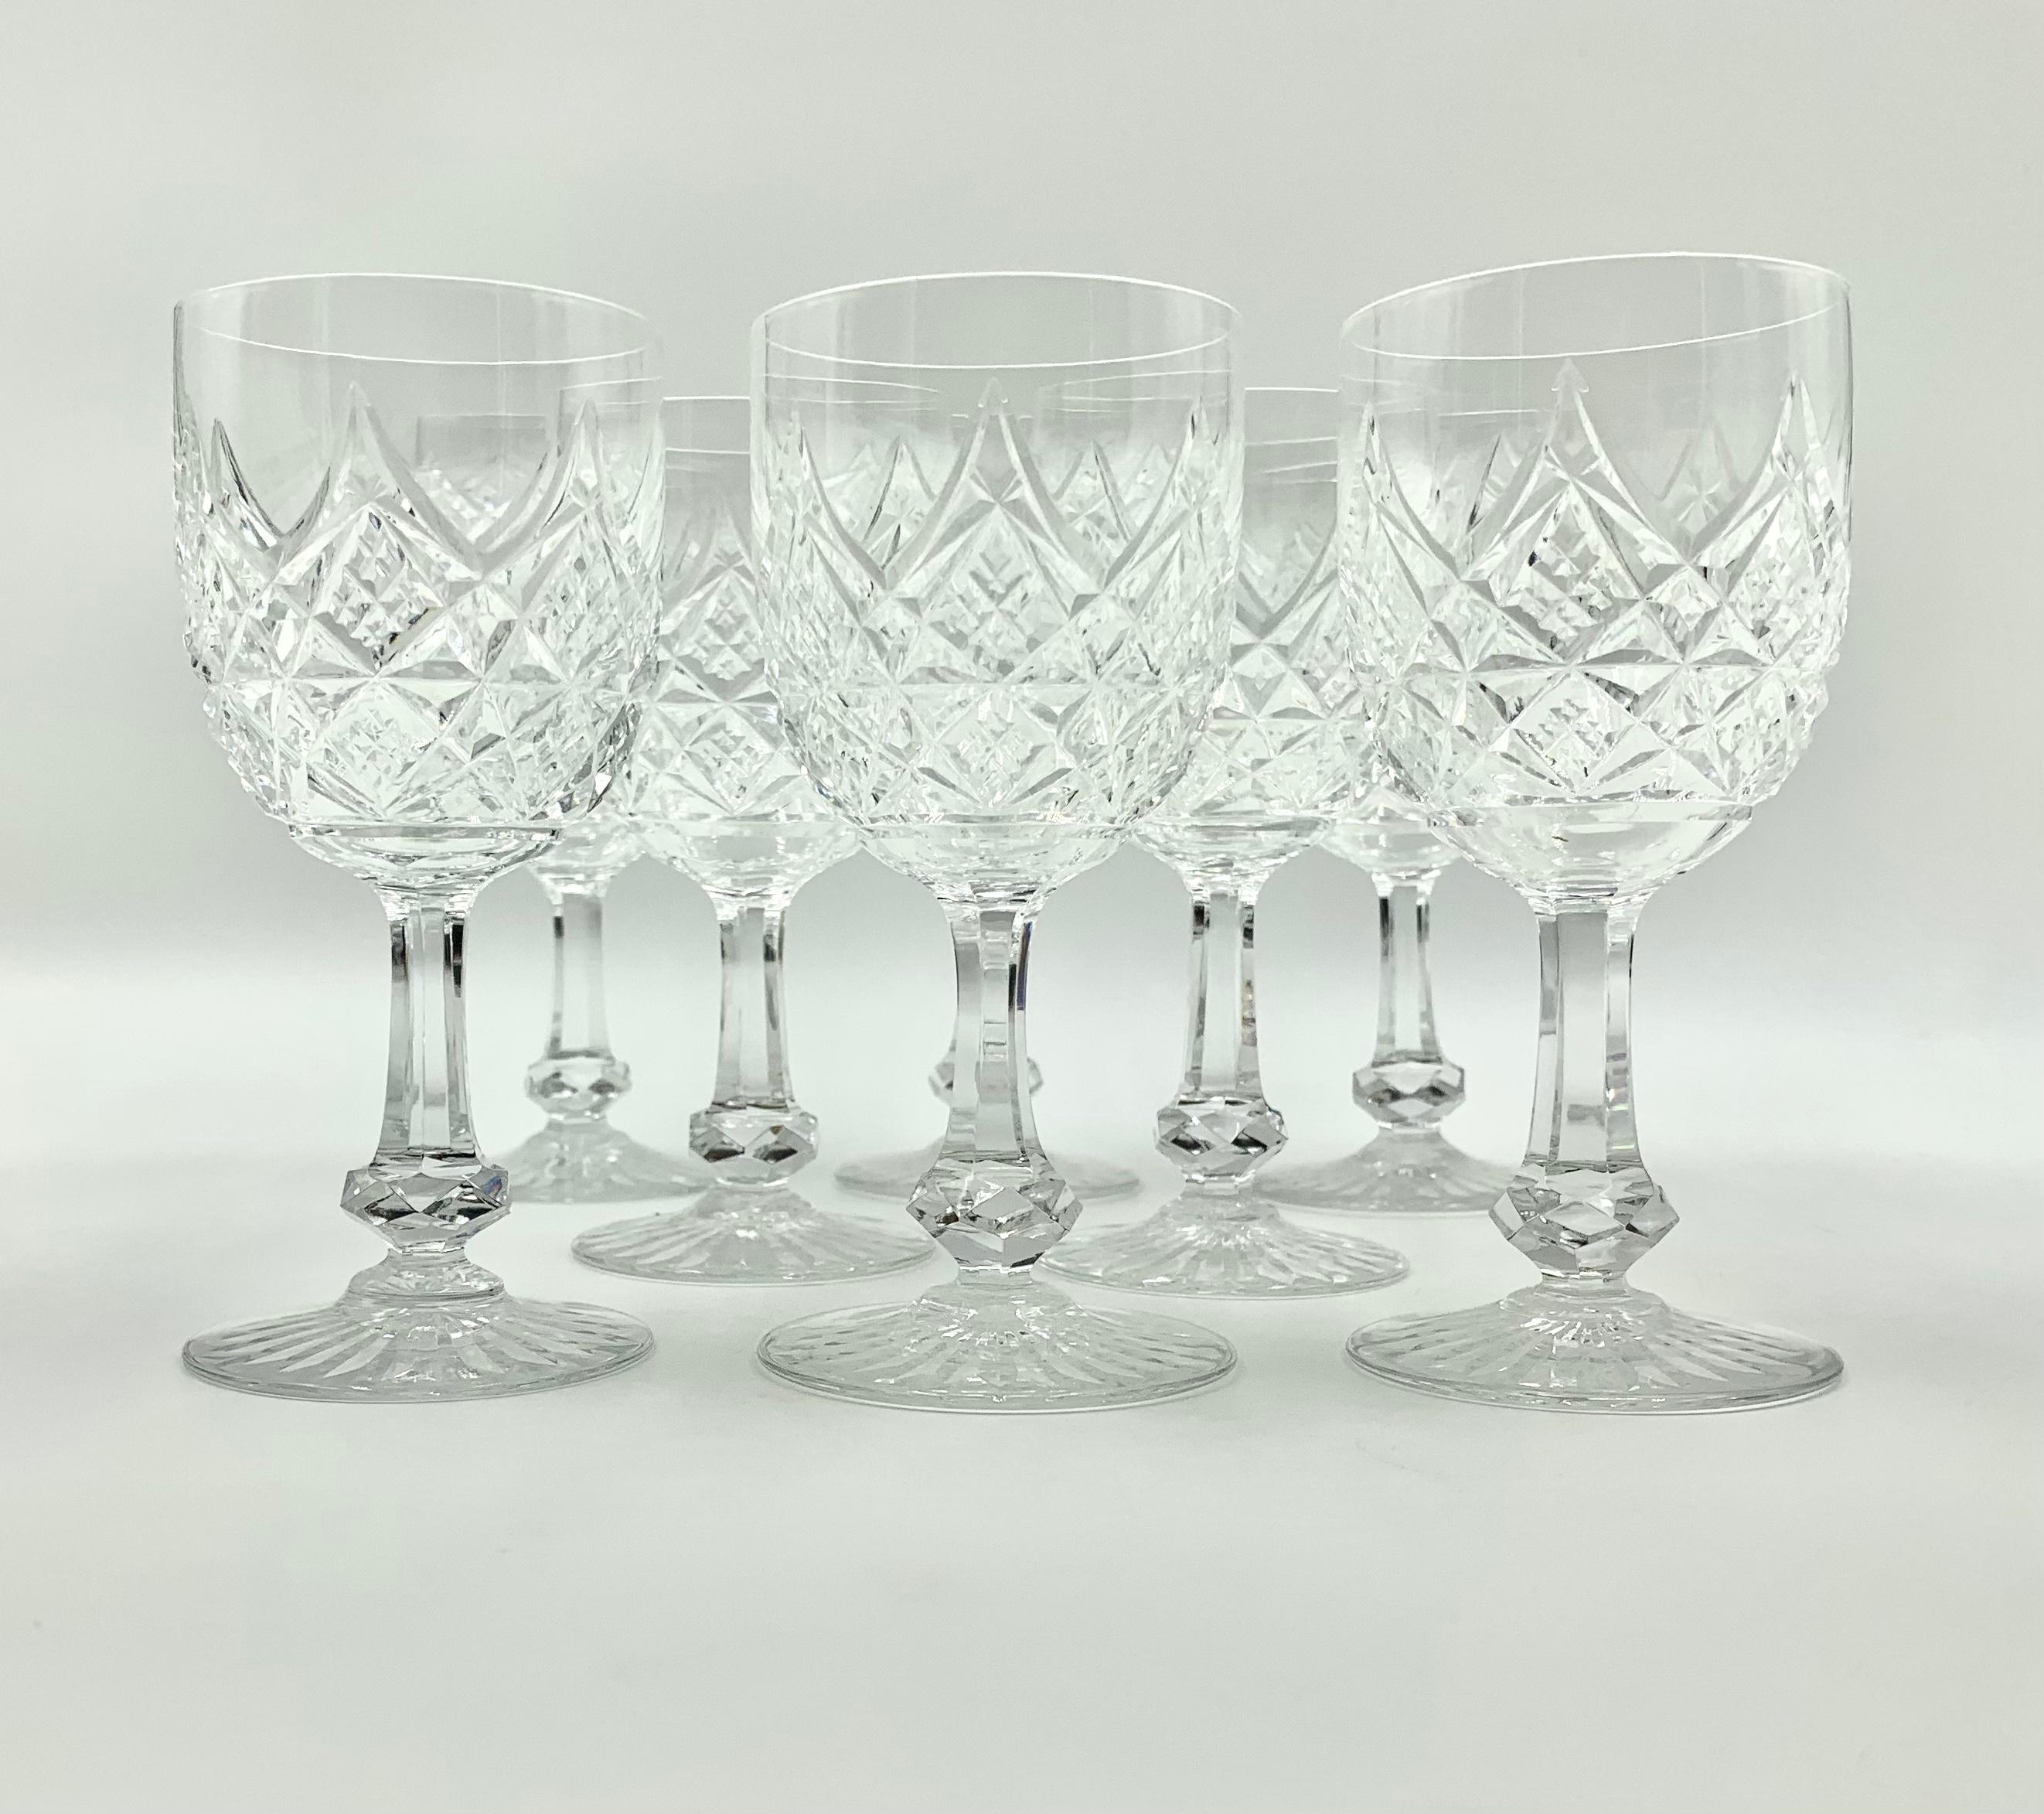 Rare Luxurious 24 Piece Baccarat Colbert Stemware Service for Eight For Sale 3